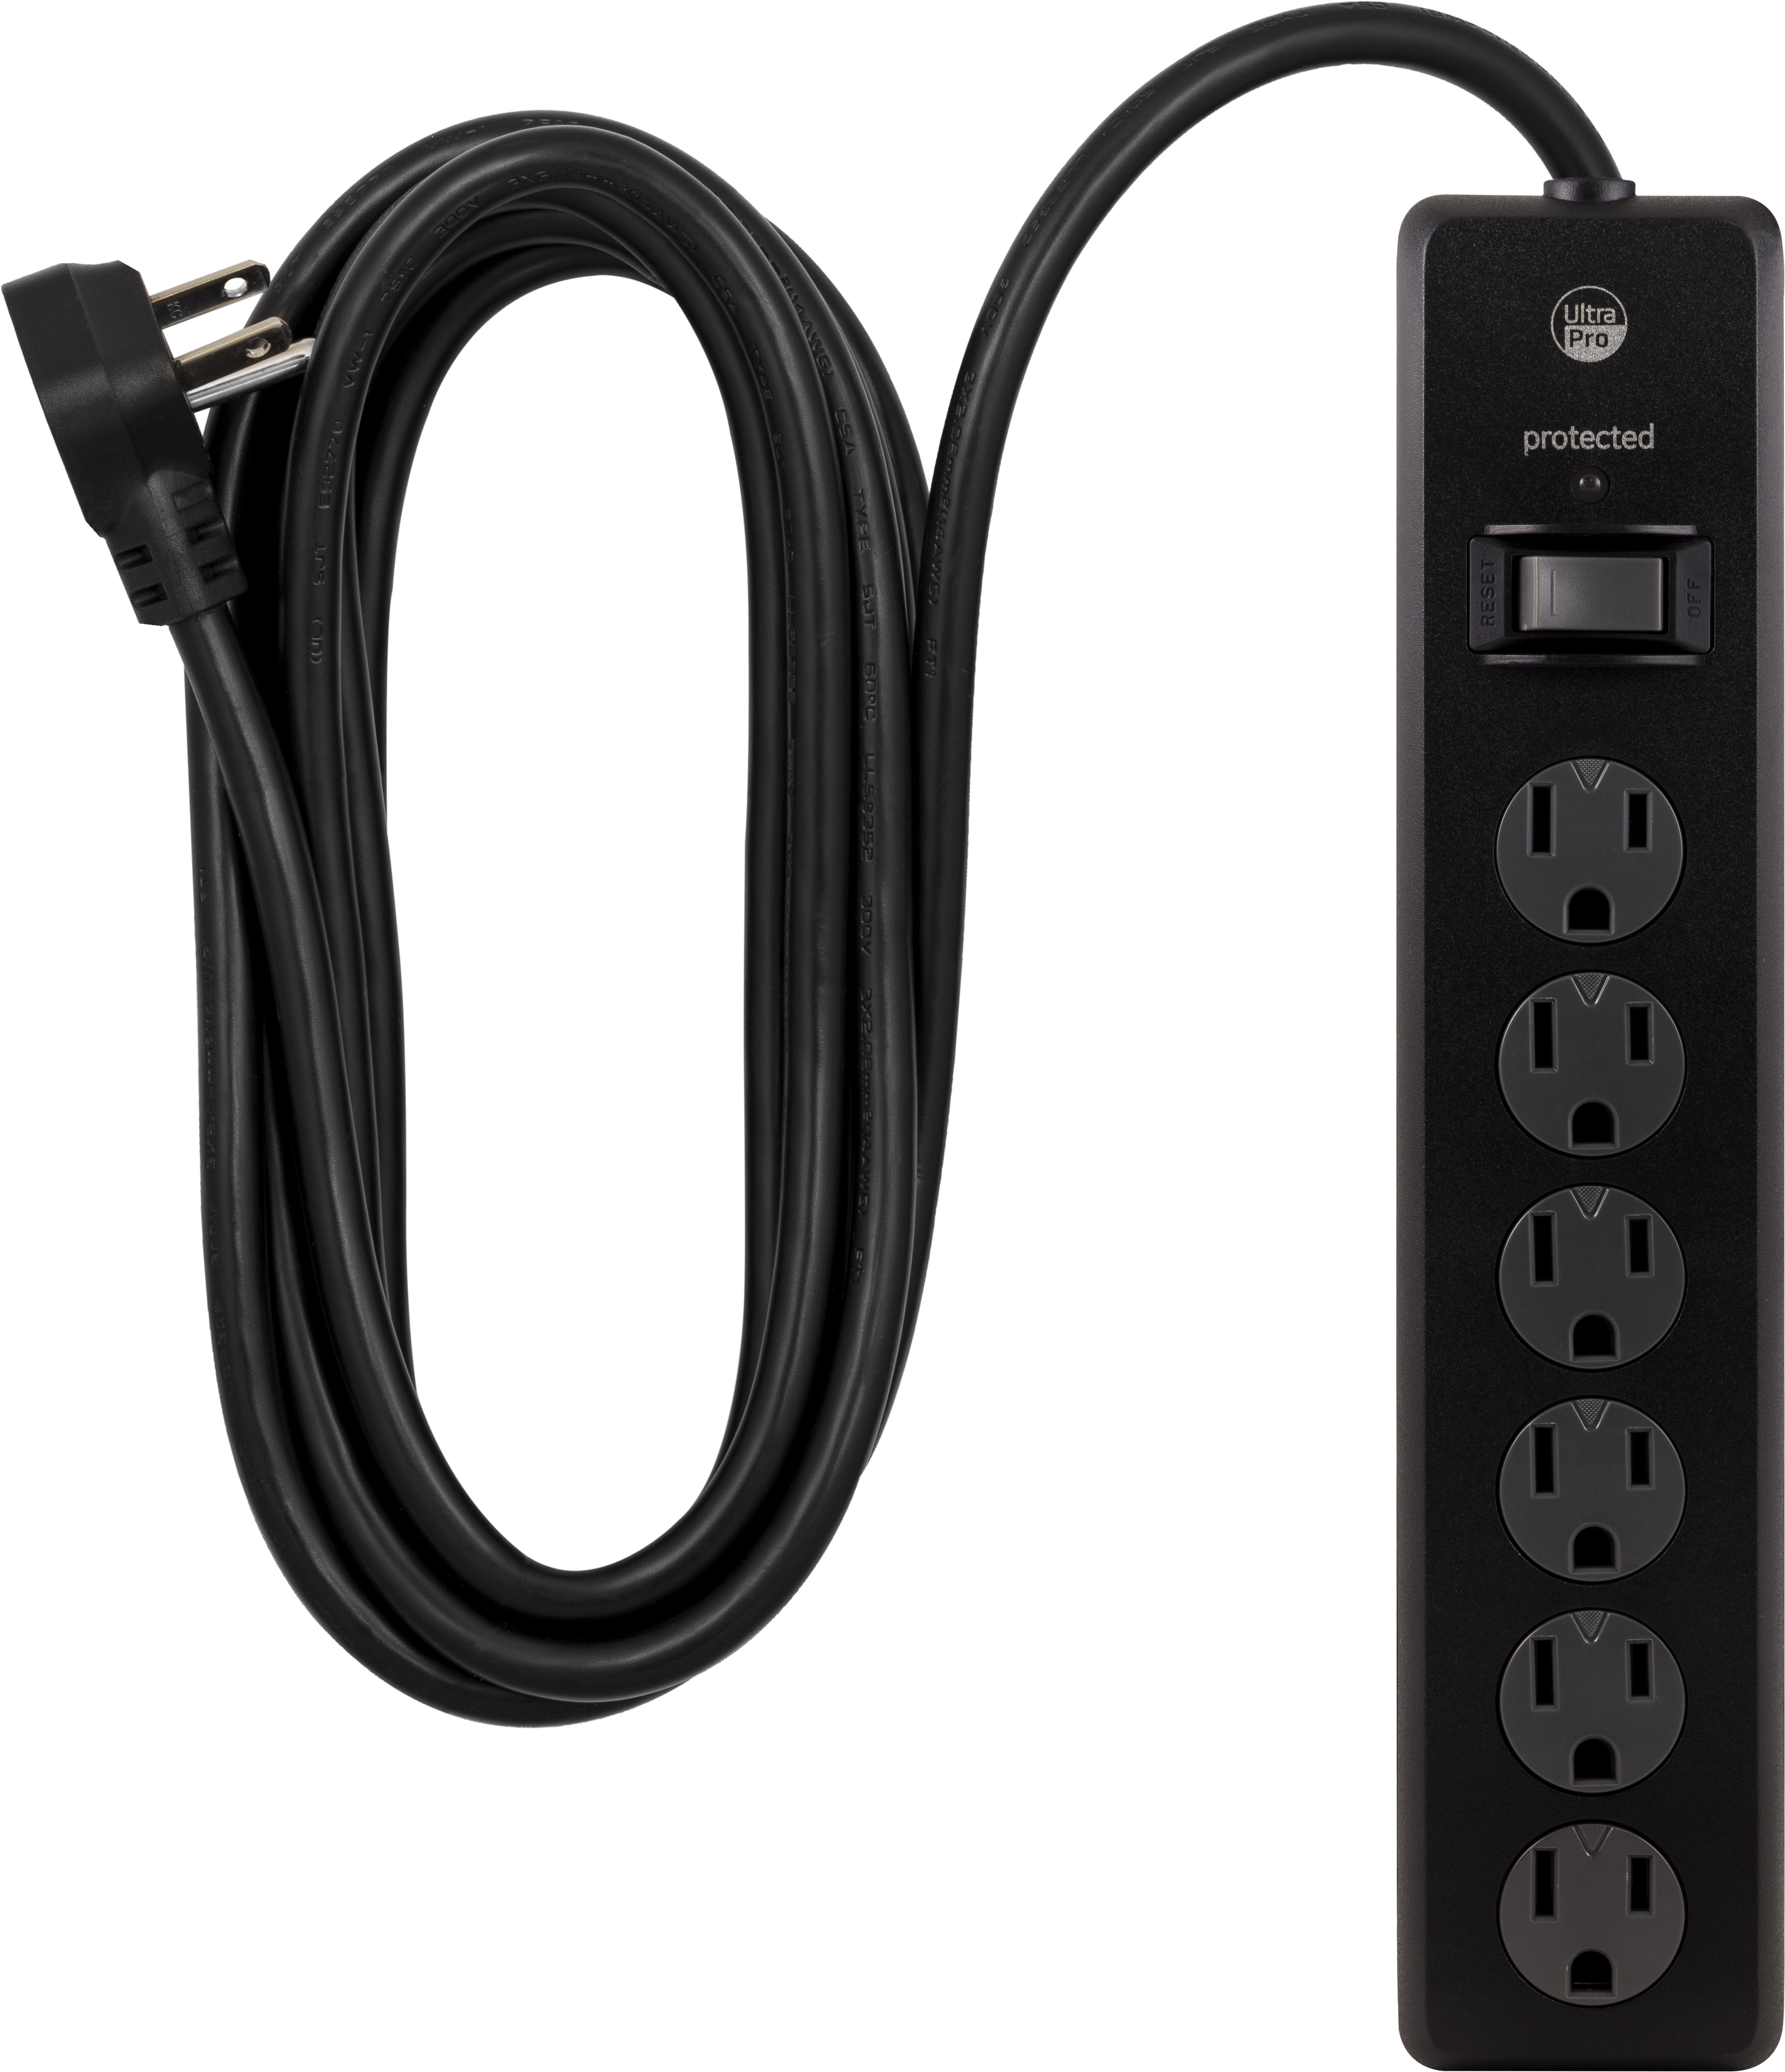 7 Outlet Heavy Duty Metal Power Strip Surge Protector with 9 Foot Extension Cord 